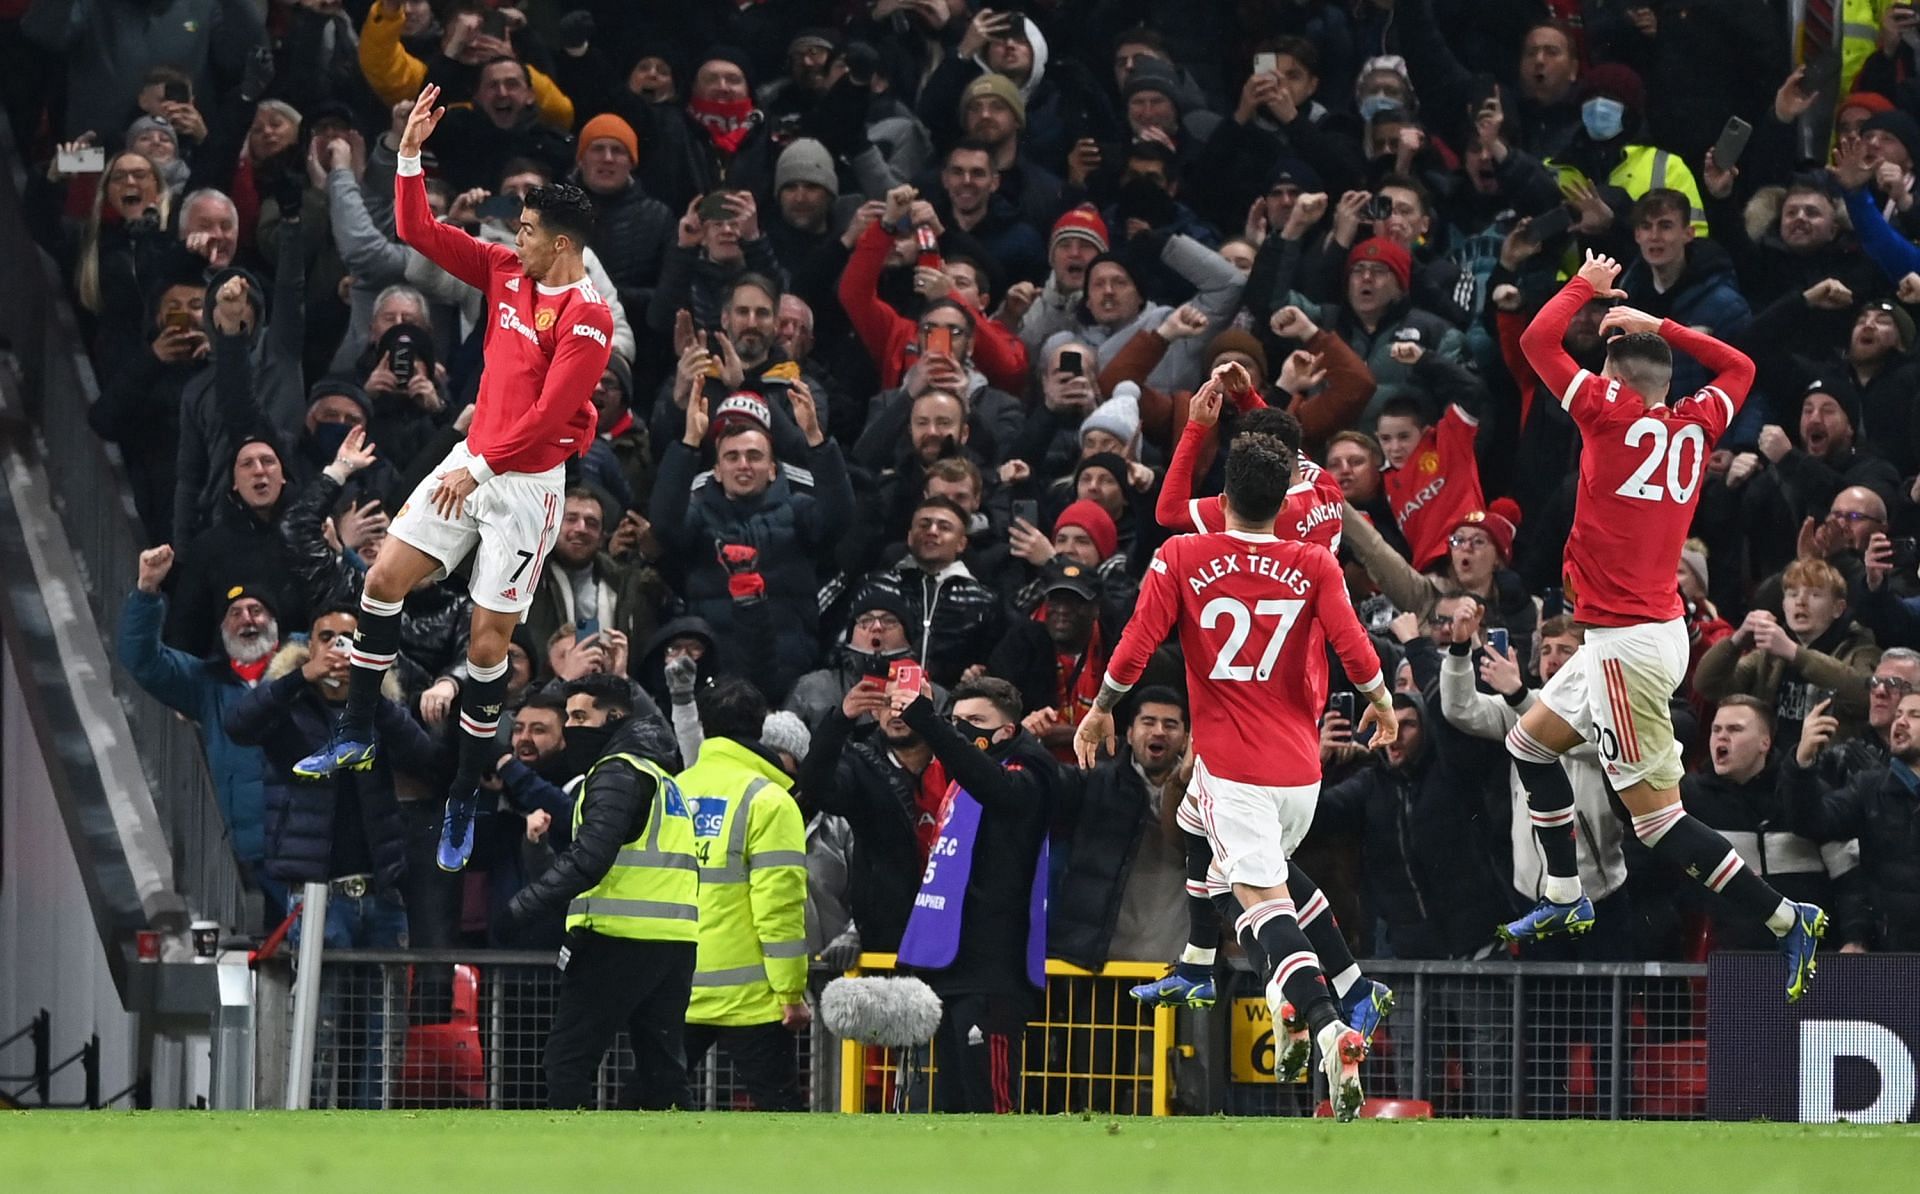 Manchester United recorded a 3-2 win over Arsenal in the Premier League